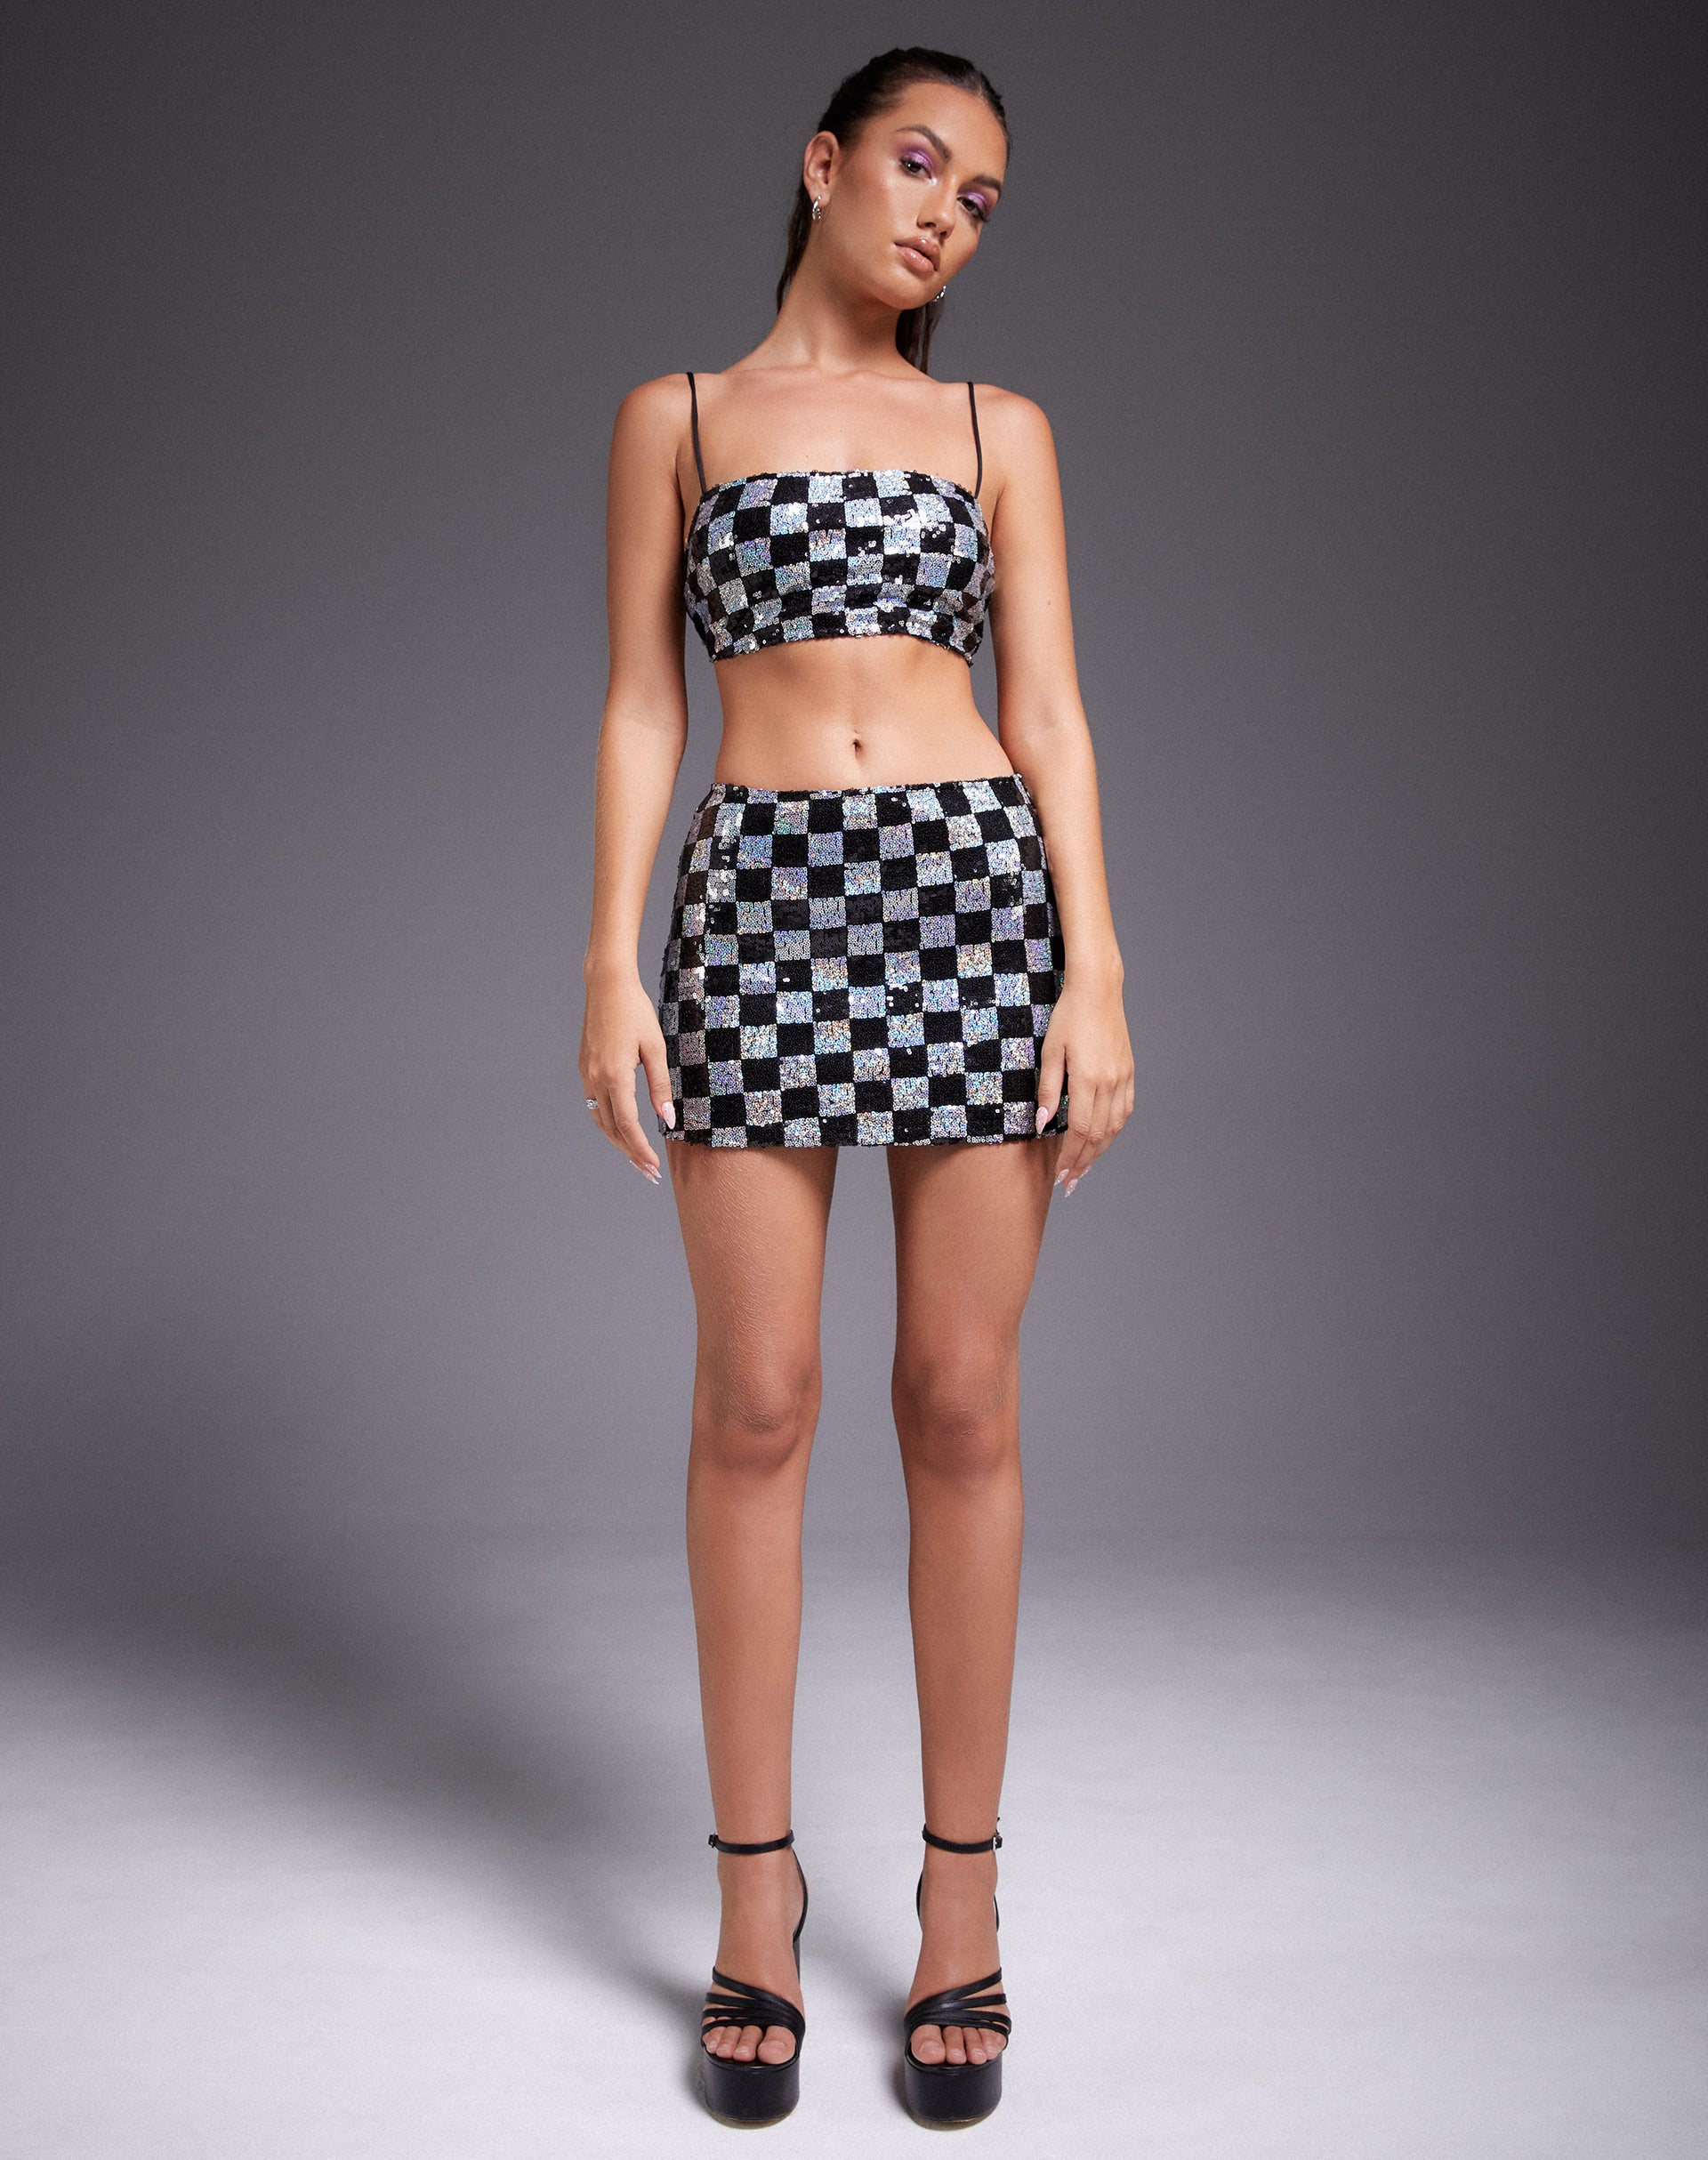 Image of Sazip Mini Skirt in Checkerboard Sequin Black and Silver